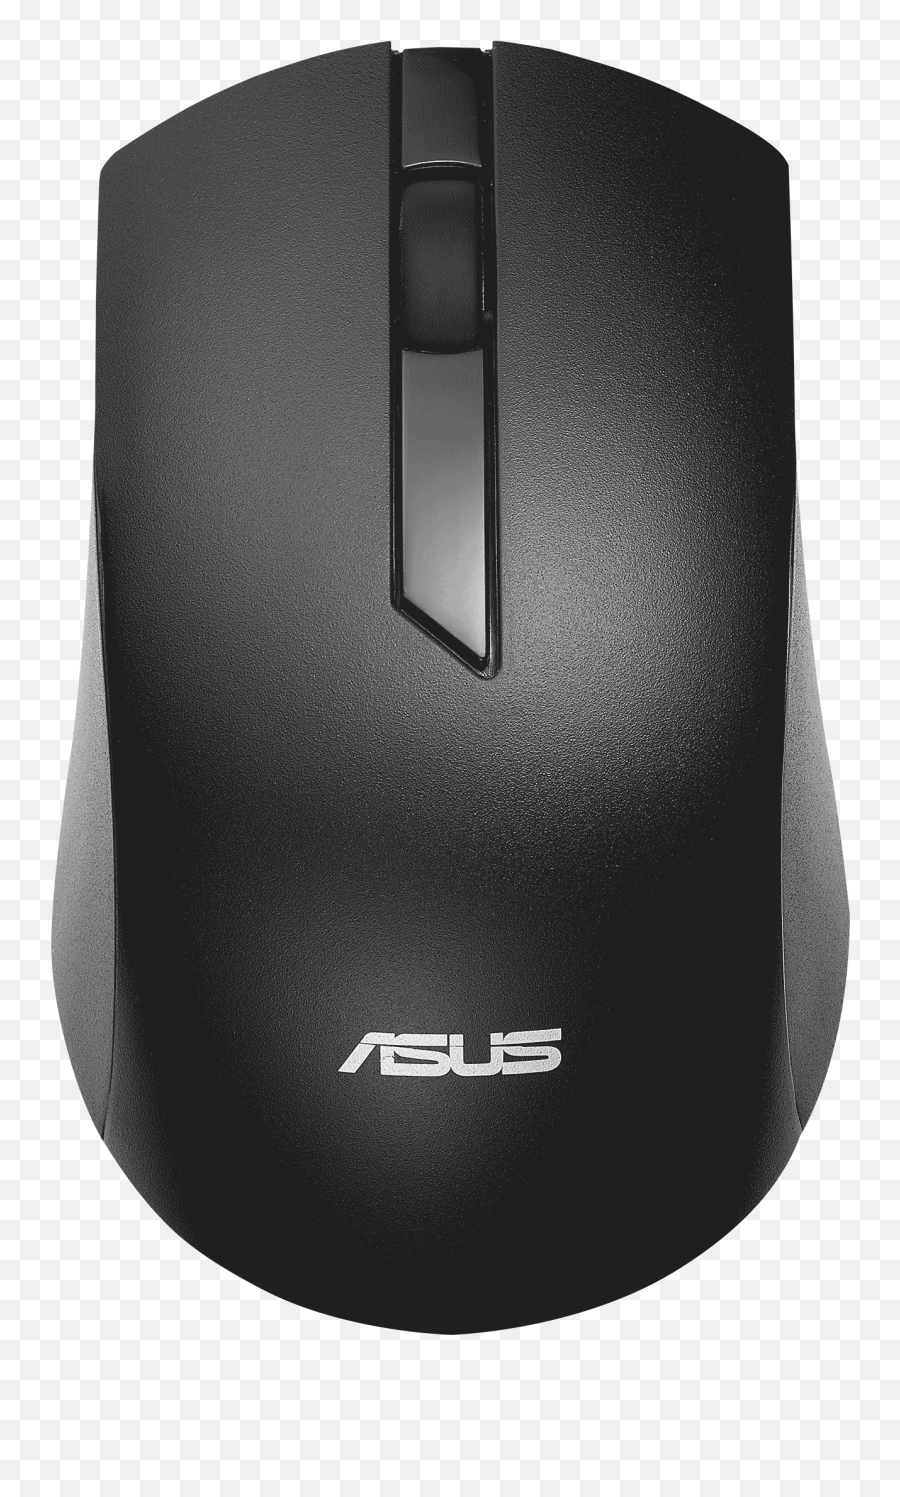 Asus W2500 Wireless Keyboard And Mouse Setkeyboardsasus - Keyboard Mouse Asus Emoji,Mouse Transparent